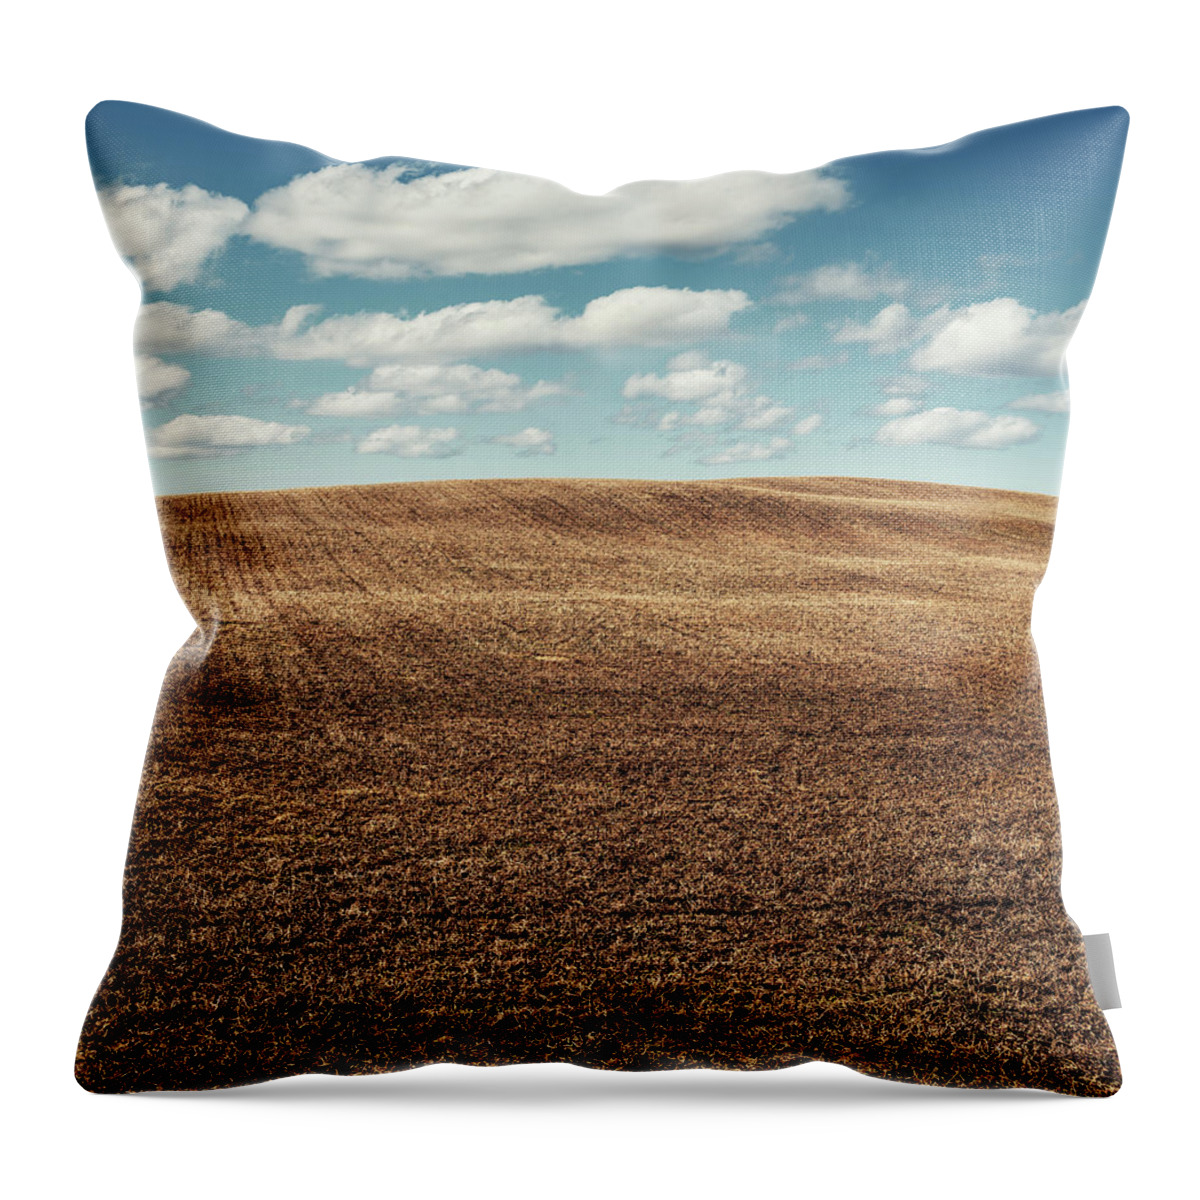 Scenics Throw Pillow featuring the photograph Late Spring by Shaunl